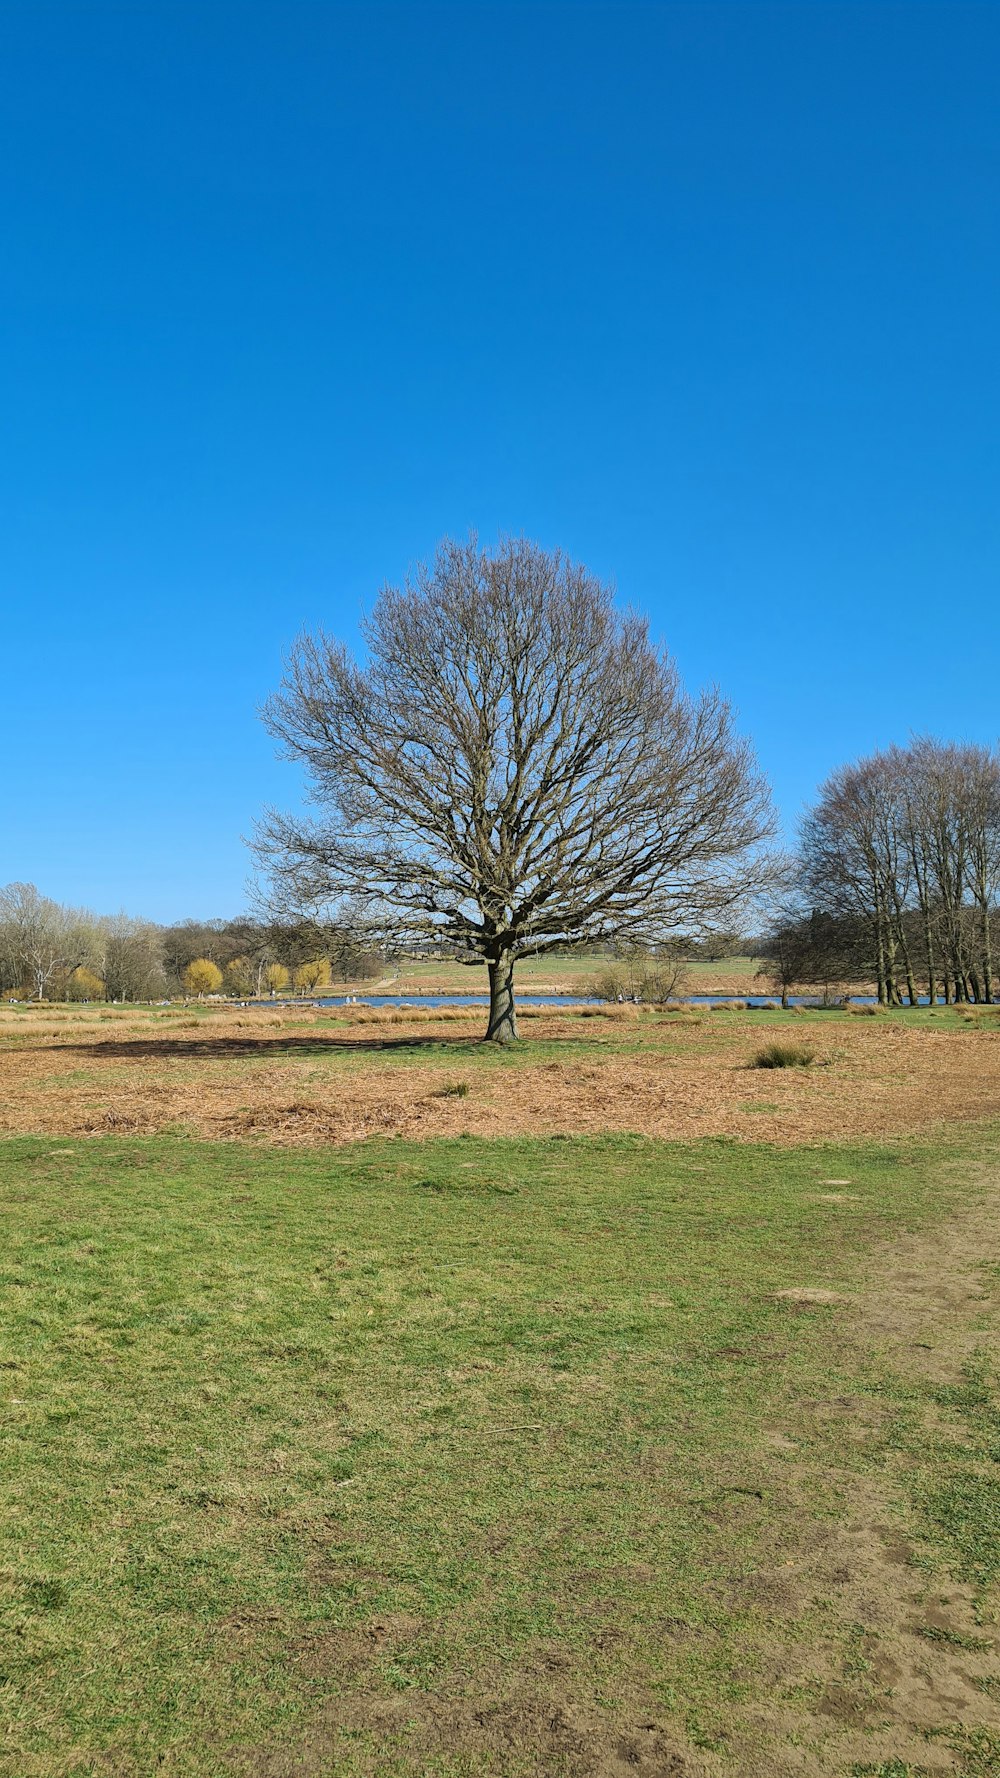 leafless trees on green grass field under blue sky during daytime